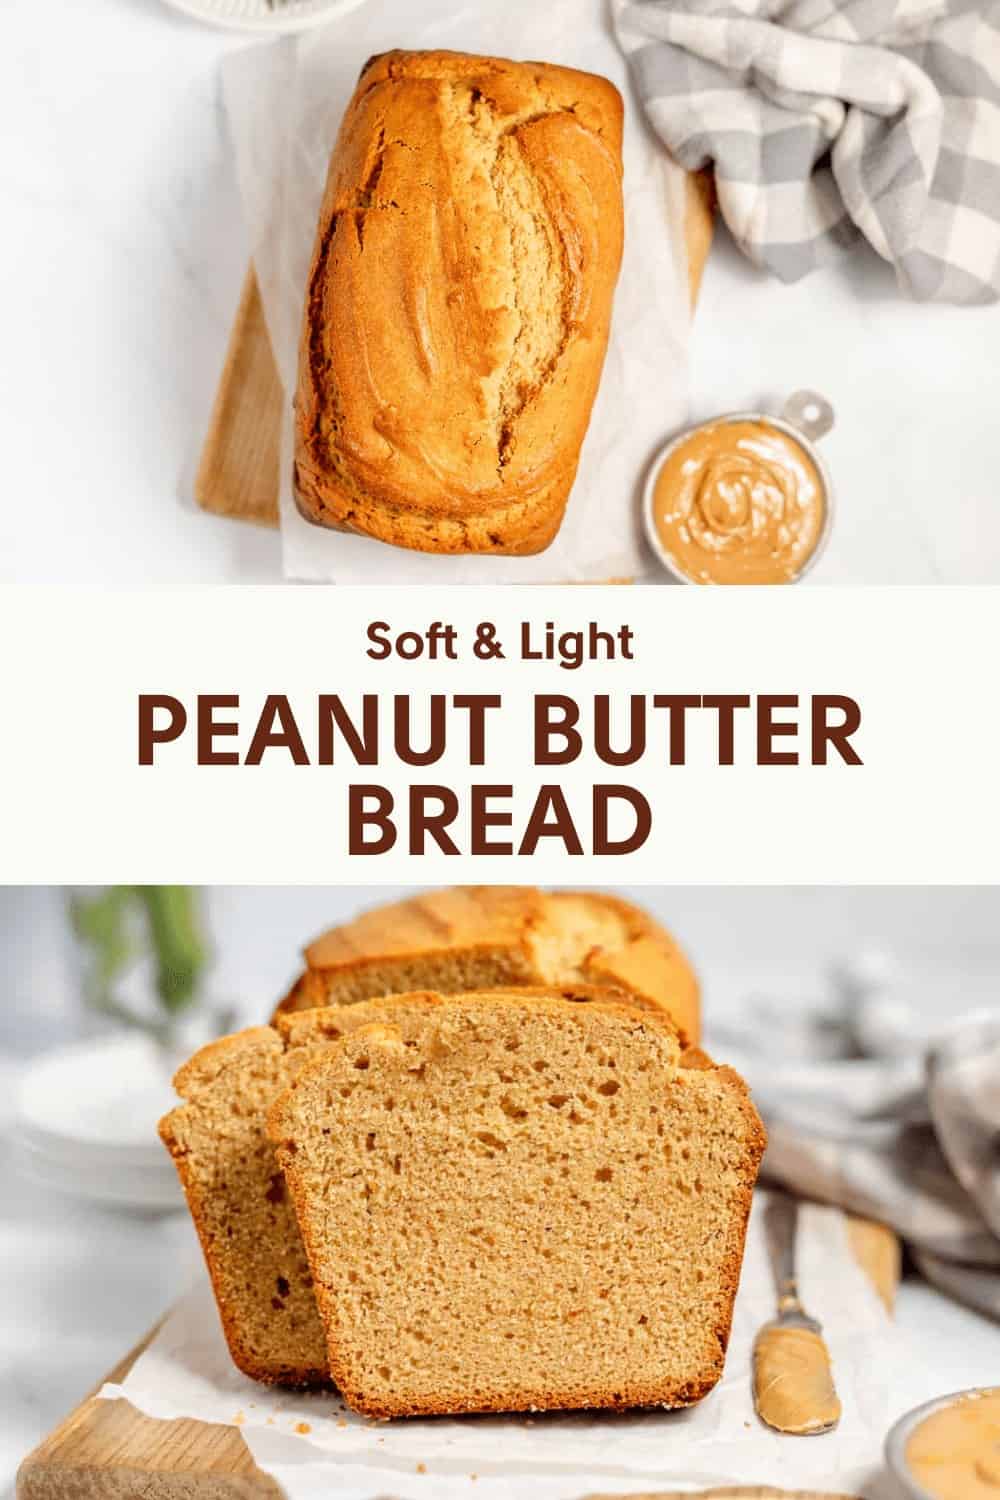 A loaf of peanut butter bread with a couple of slices cut, presented on a wooden board alongside a jar of peanut butter, with text overlay describing it as "soft & light peanut butter bread".